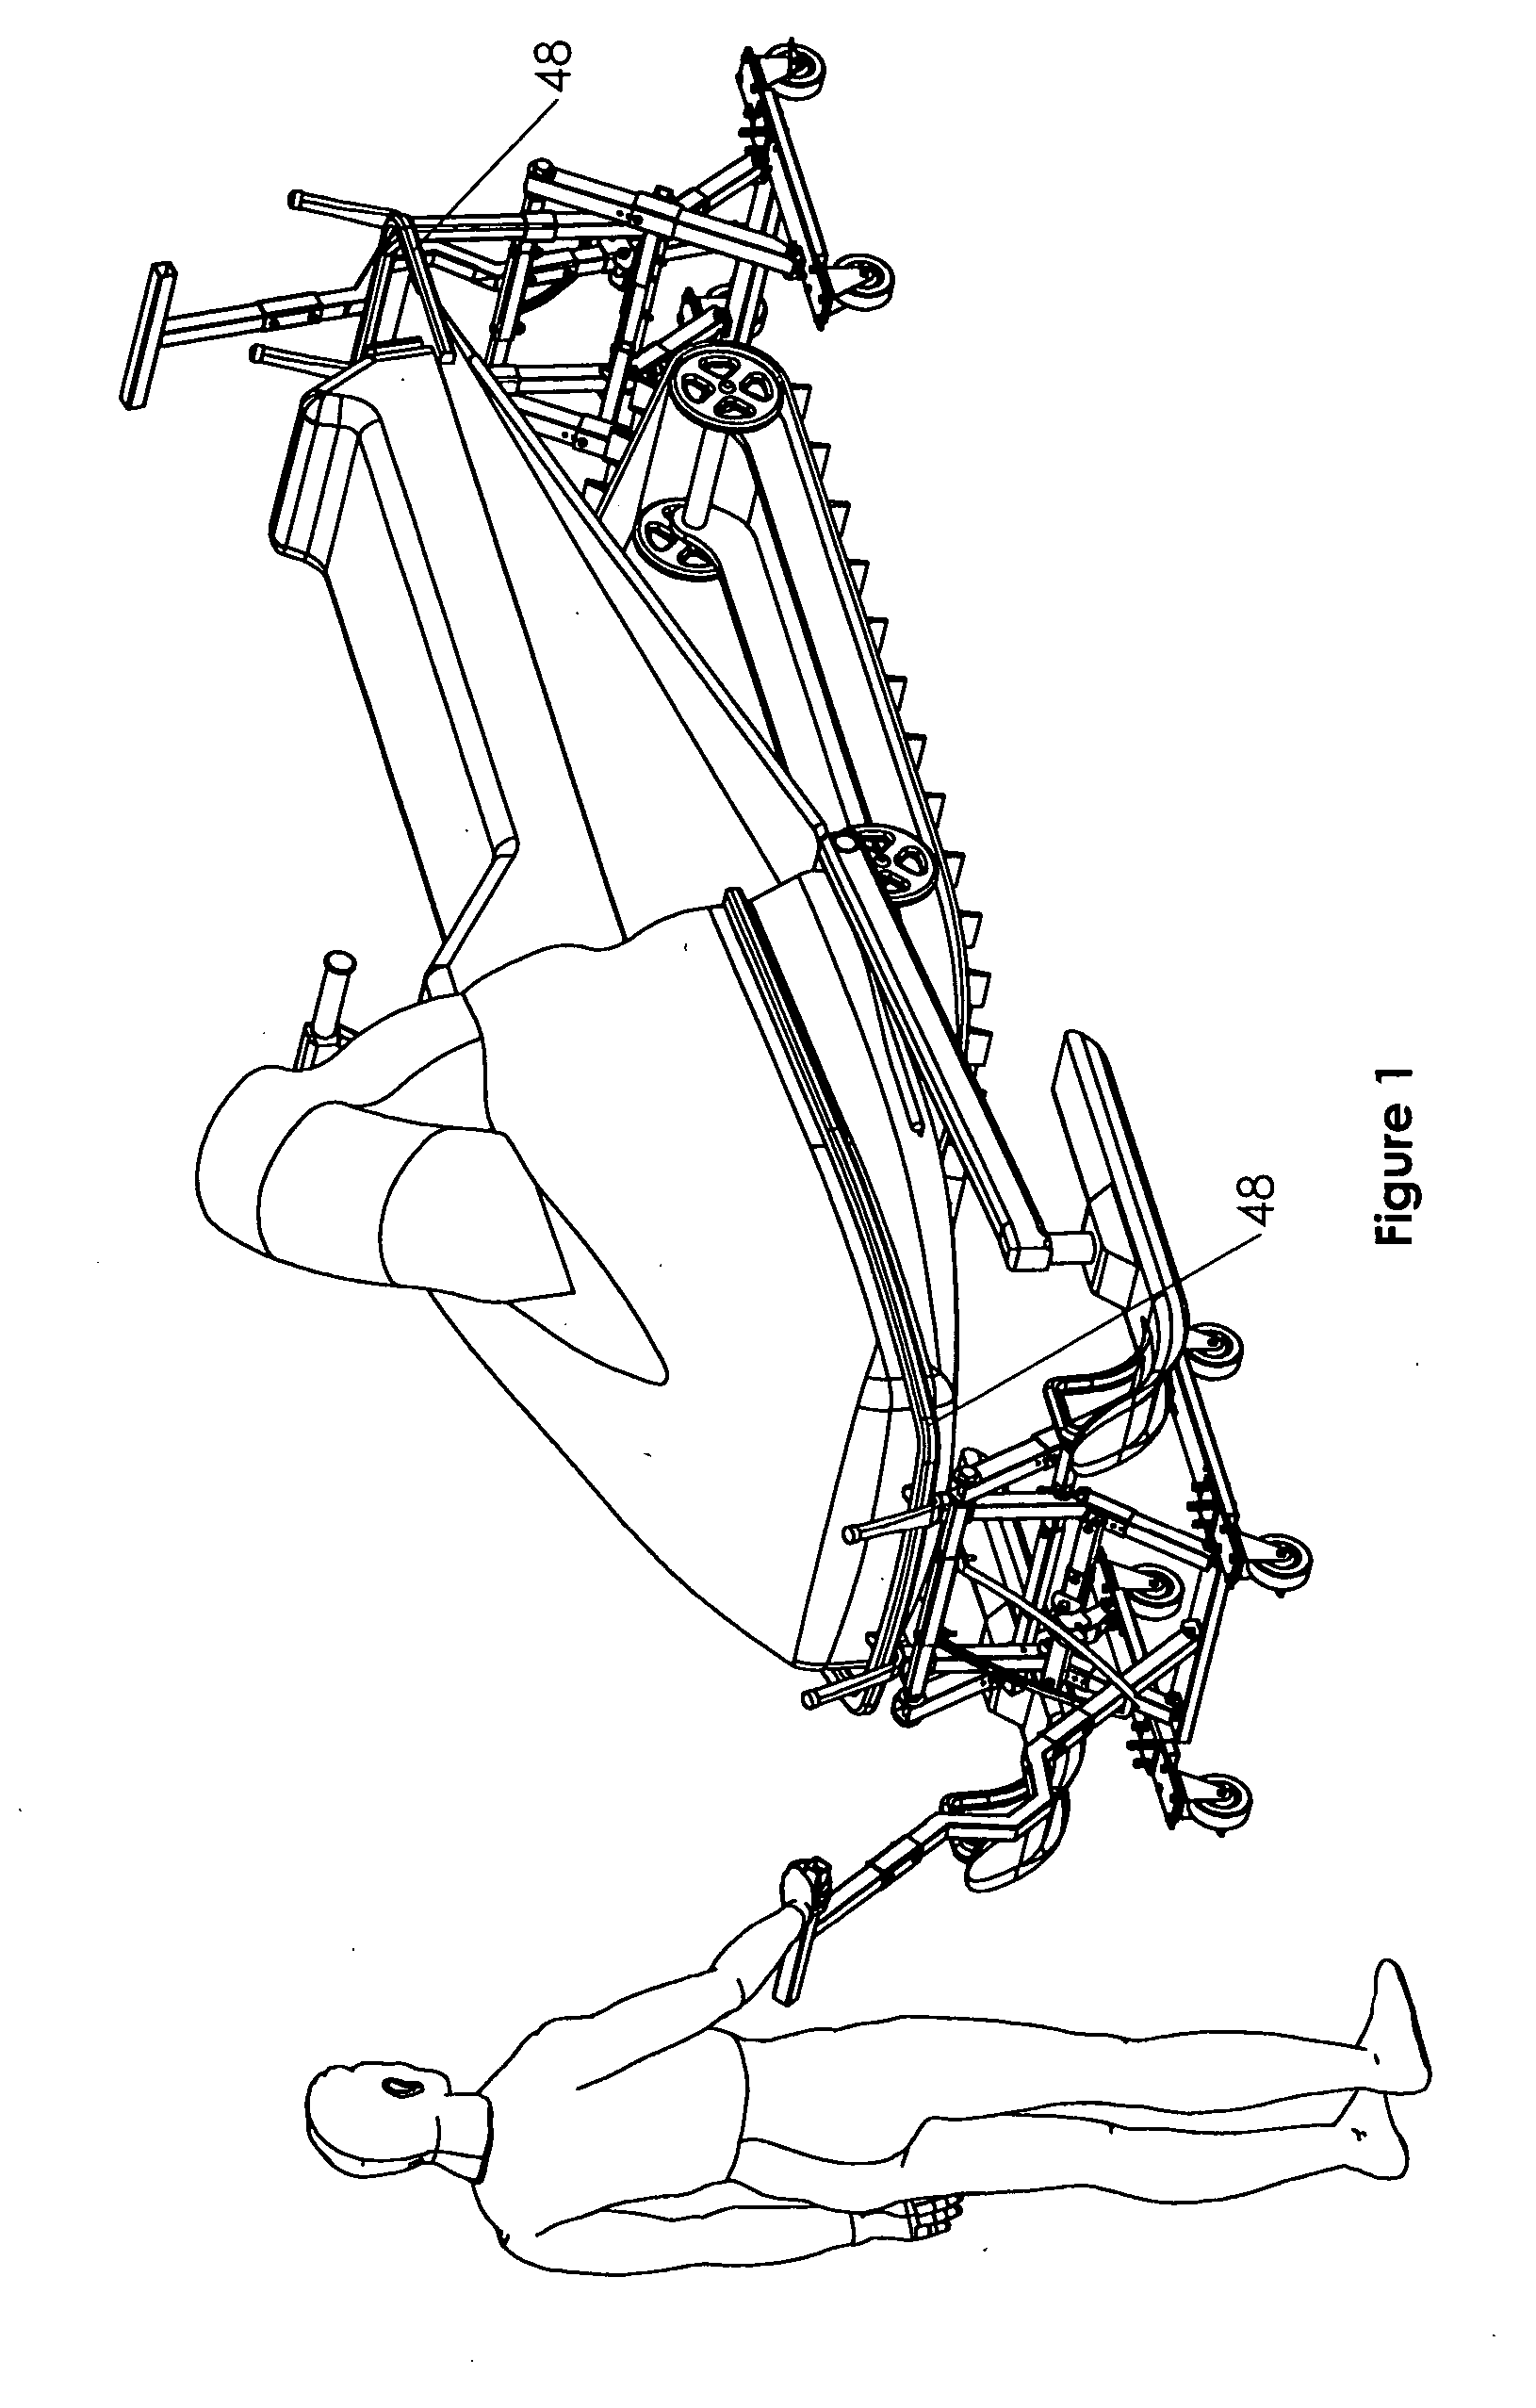 Snowmobile lifting device